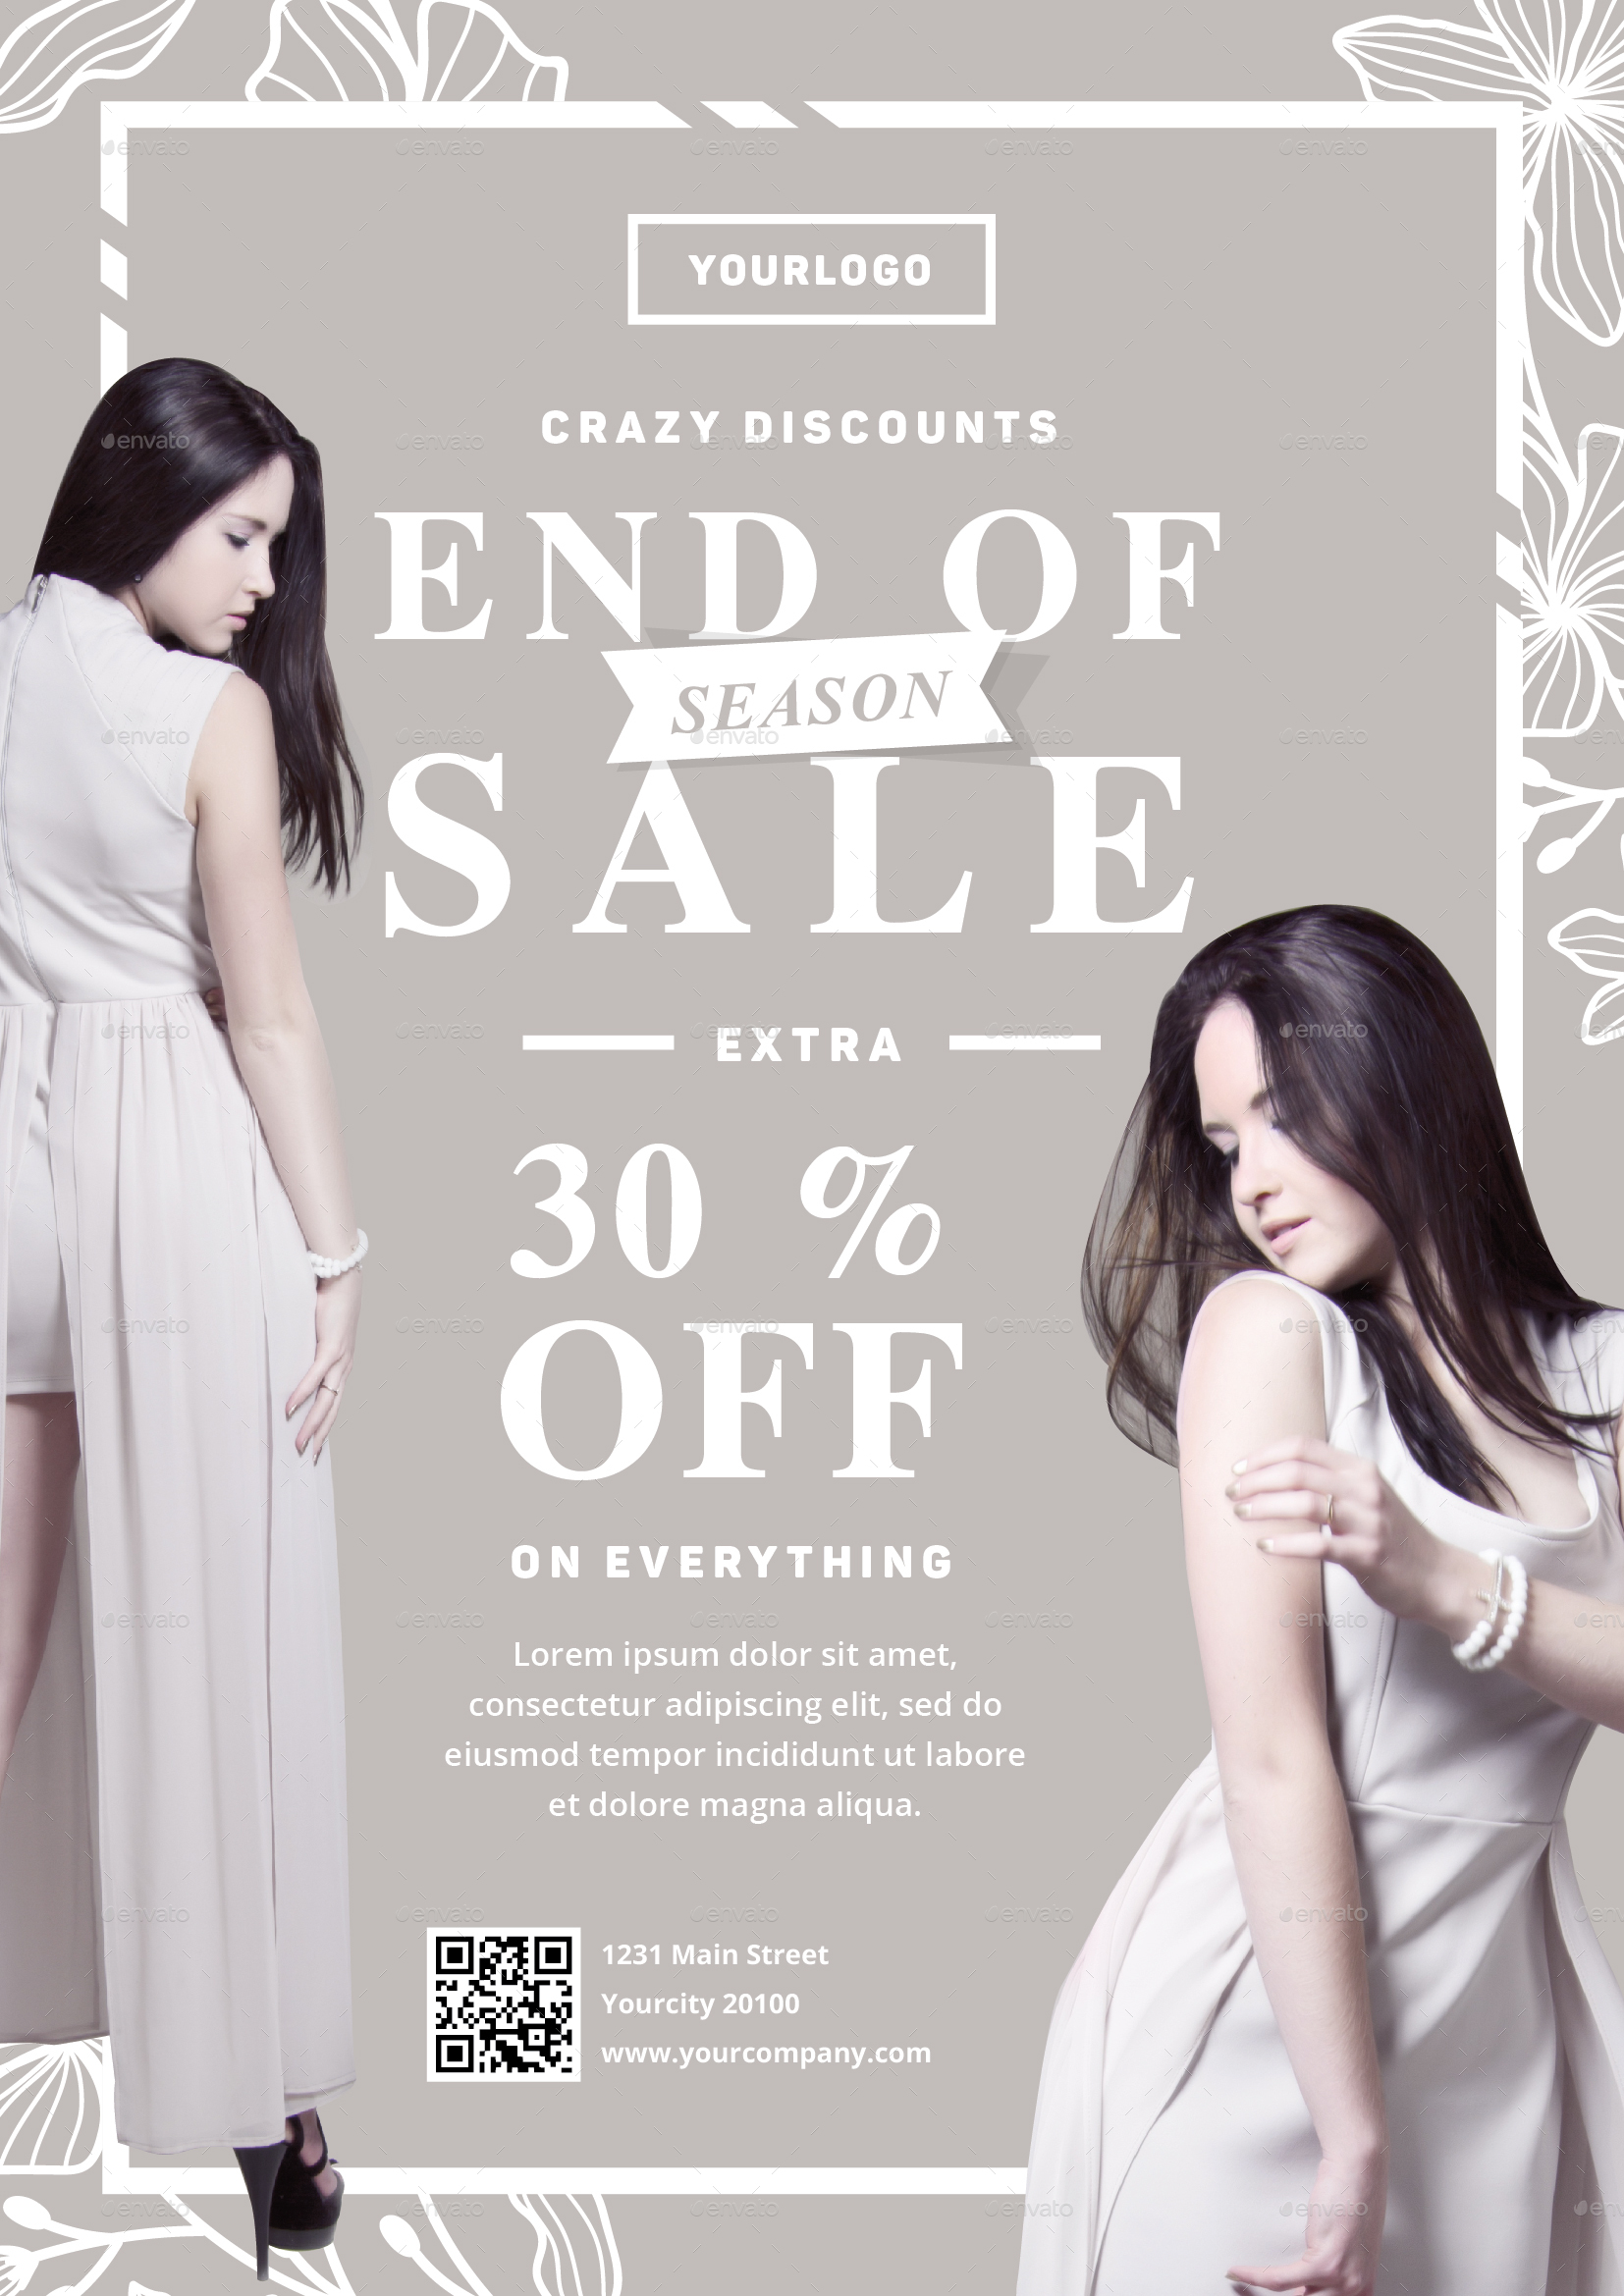 END OF SEASON SALE FLYER/ POSTER by TotemDesigns ...